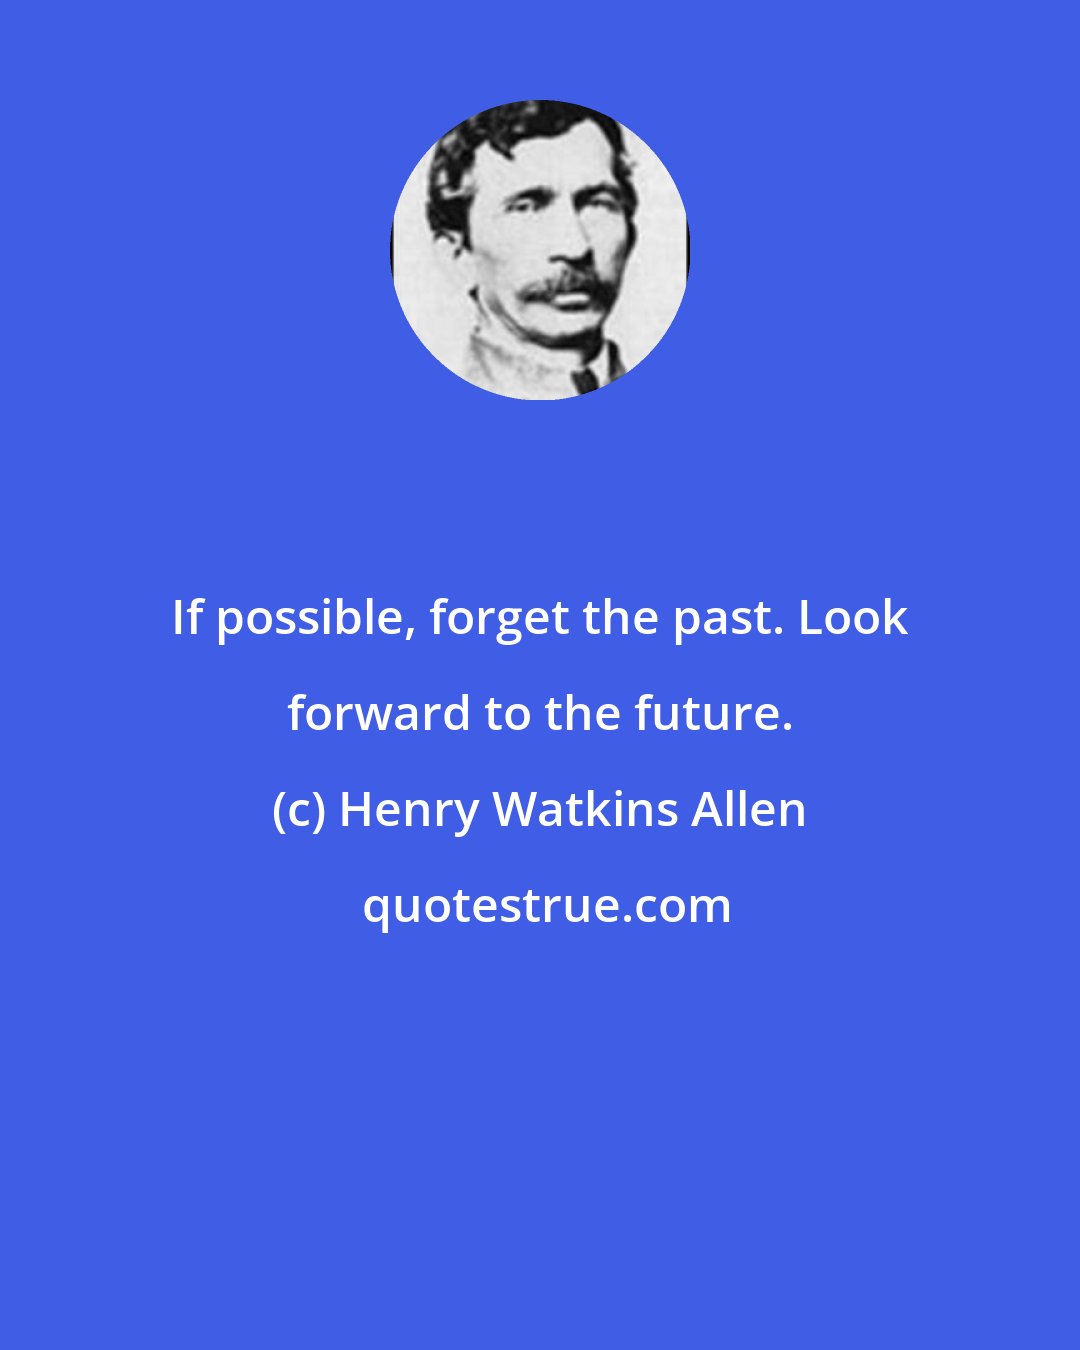 Henry Watkins Allen: If possible, forget the past. Look forward to the future.